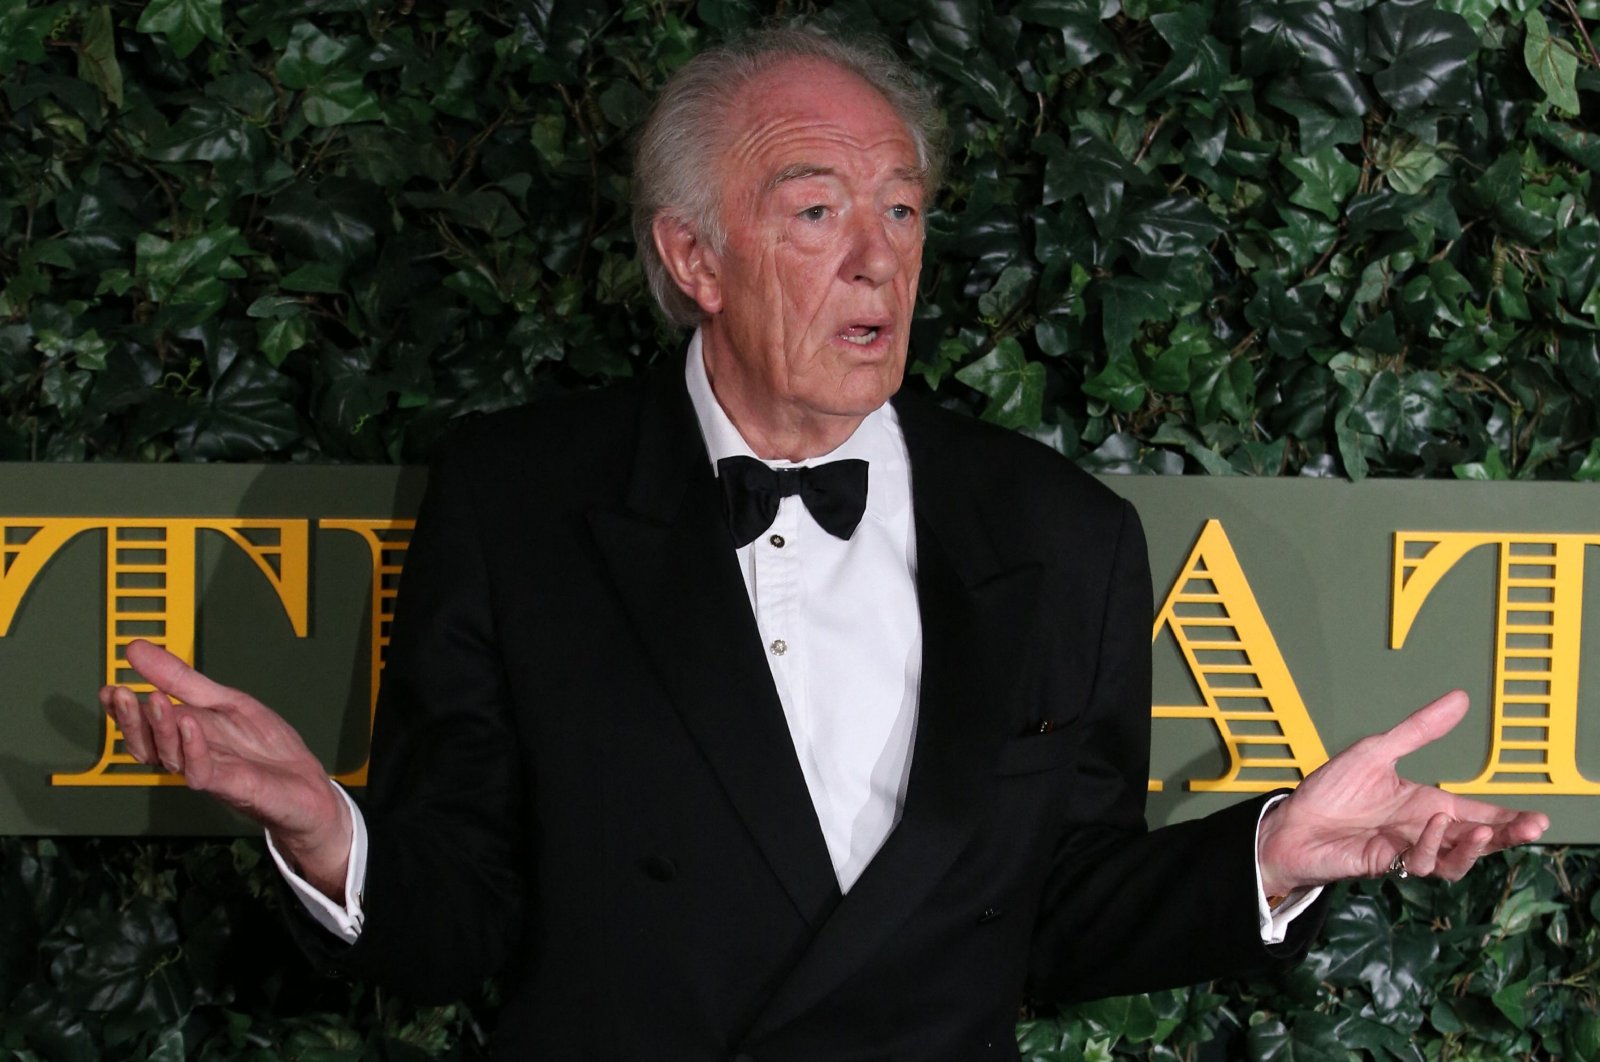 British actor Michael Gambon poses on the red carpet as he attends the 62nd London Evening Standard Theatre Awards 2016 in London, Britain, Nov. 13, 2016. British actor Michael Gambon, best known for playing Albus Dumbledore in six of the eight "Harry Potter" films, died peacefully in hospital aged 82, his family announced on Sept. 28, 2023. (AFP Photo)